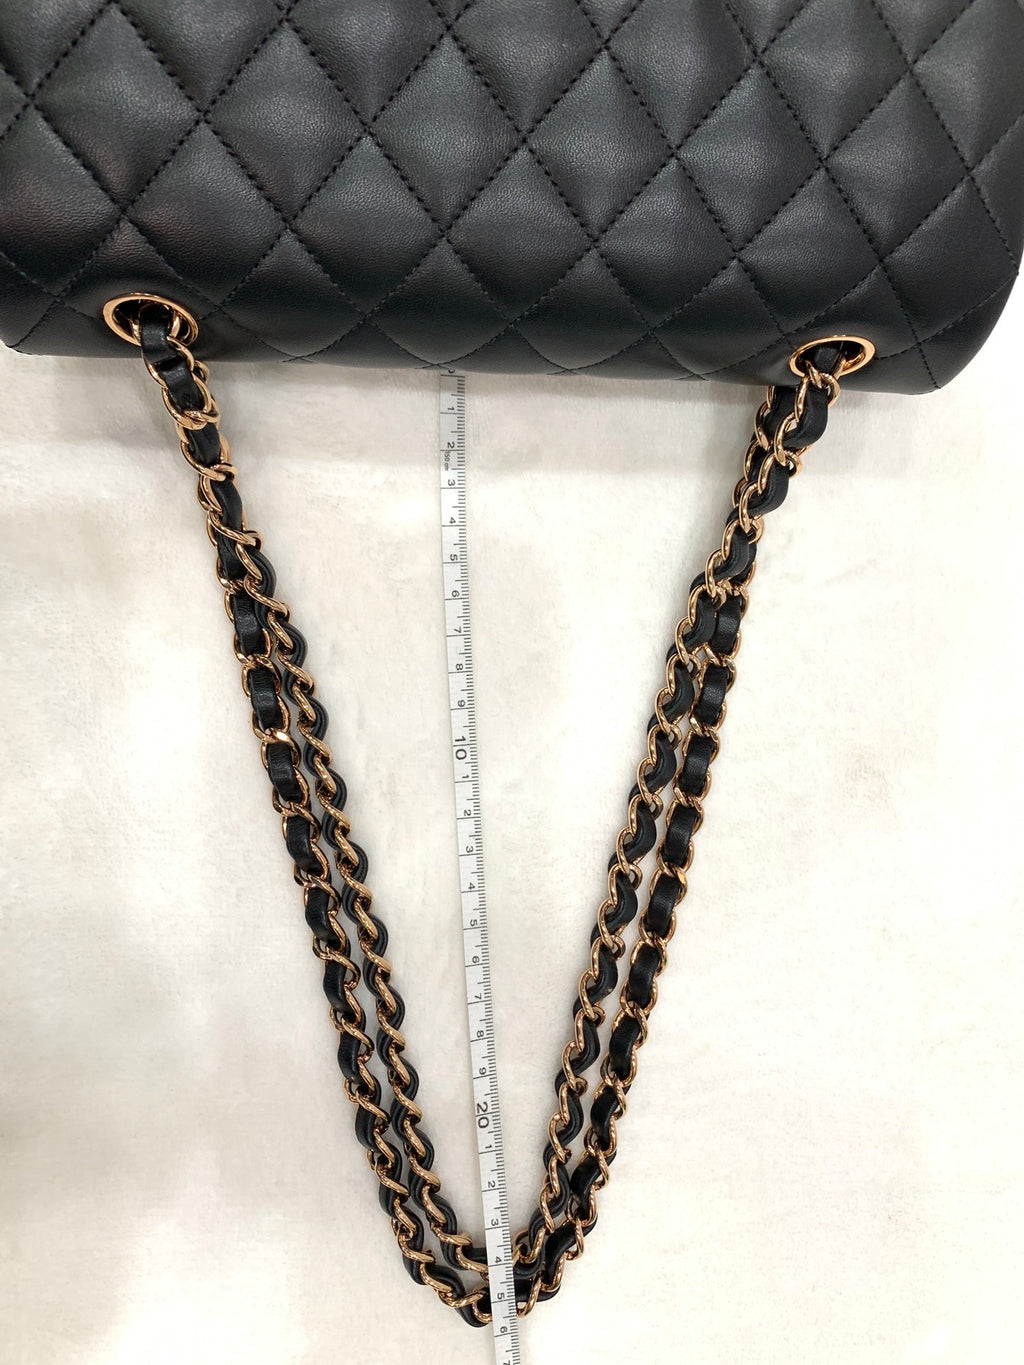 Chanel Classic Flap Bag Sizes 101 Clever Girl Finance